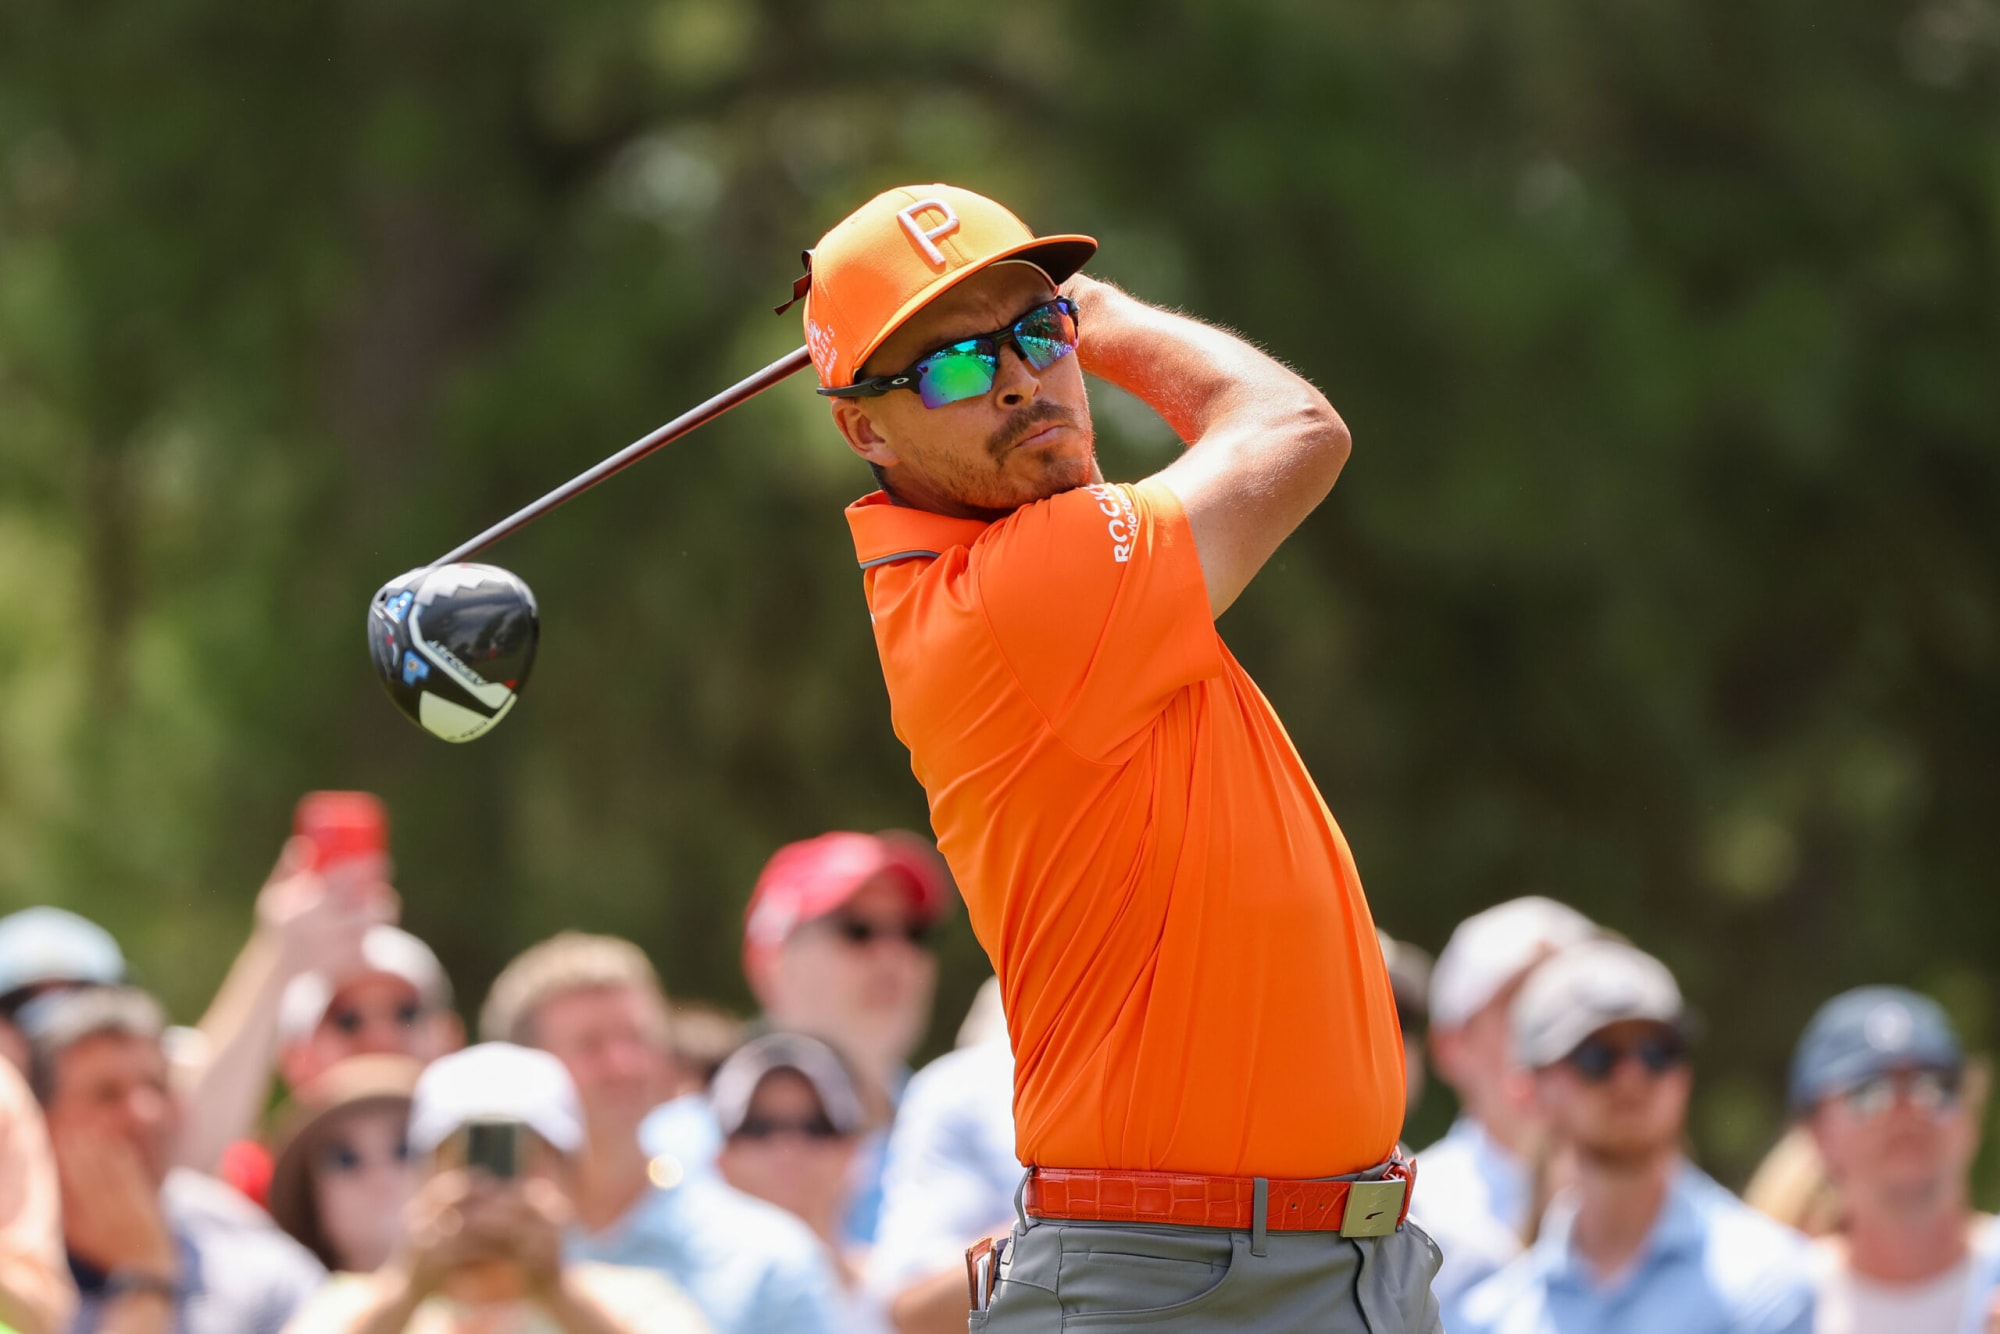 2023 PGA Championship: Rickie Fowler poised to contend at Oak Hill